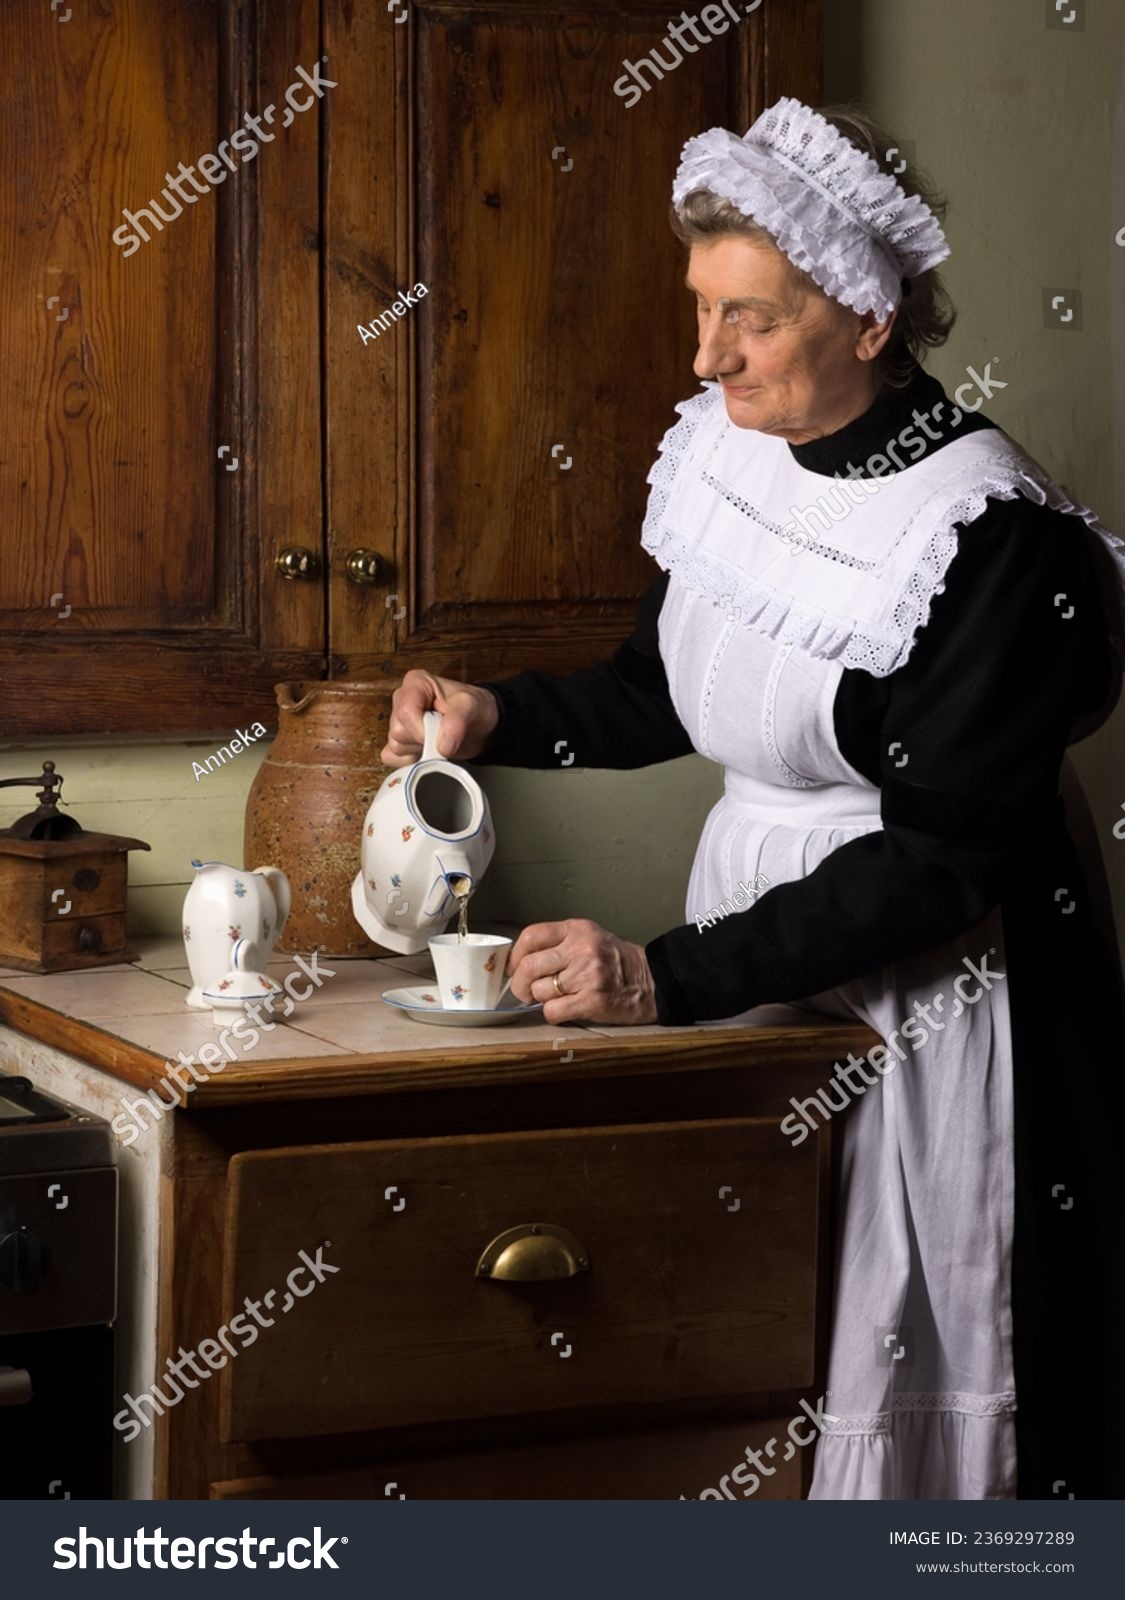 Victorian maid or servant in black dress, lace cap and white apron working in a 19th century interior #2369297289